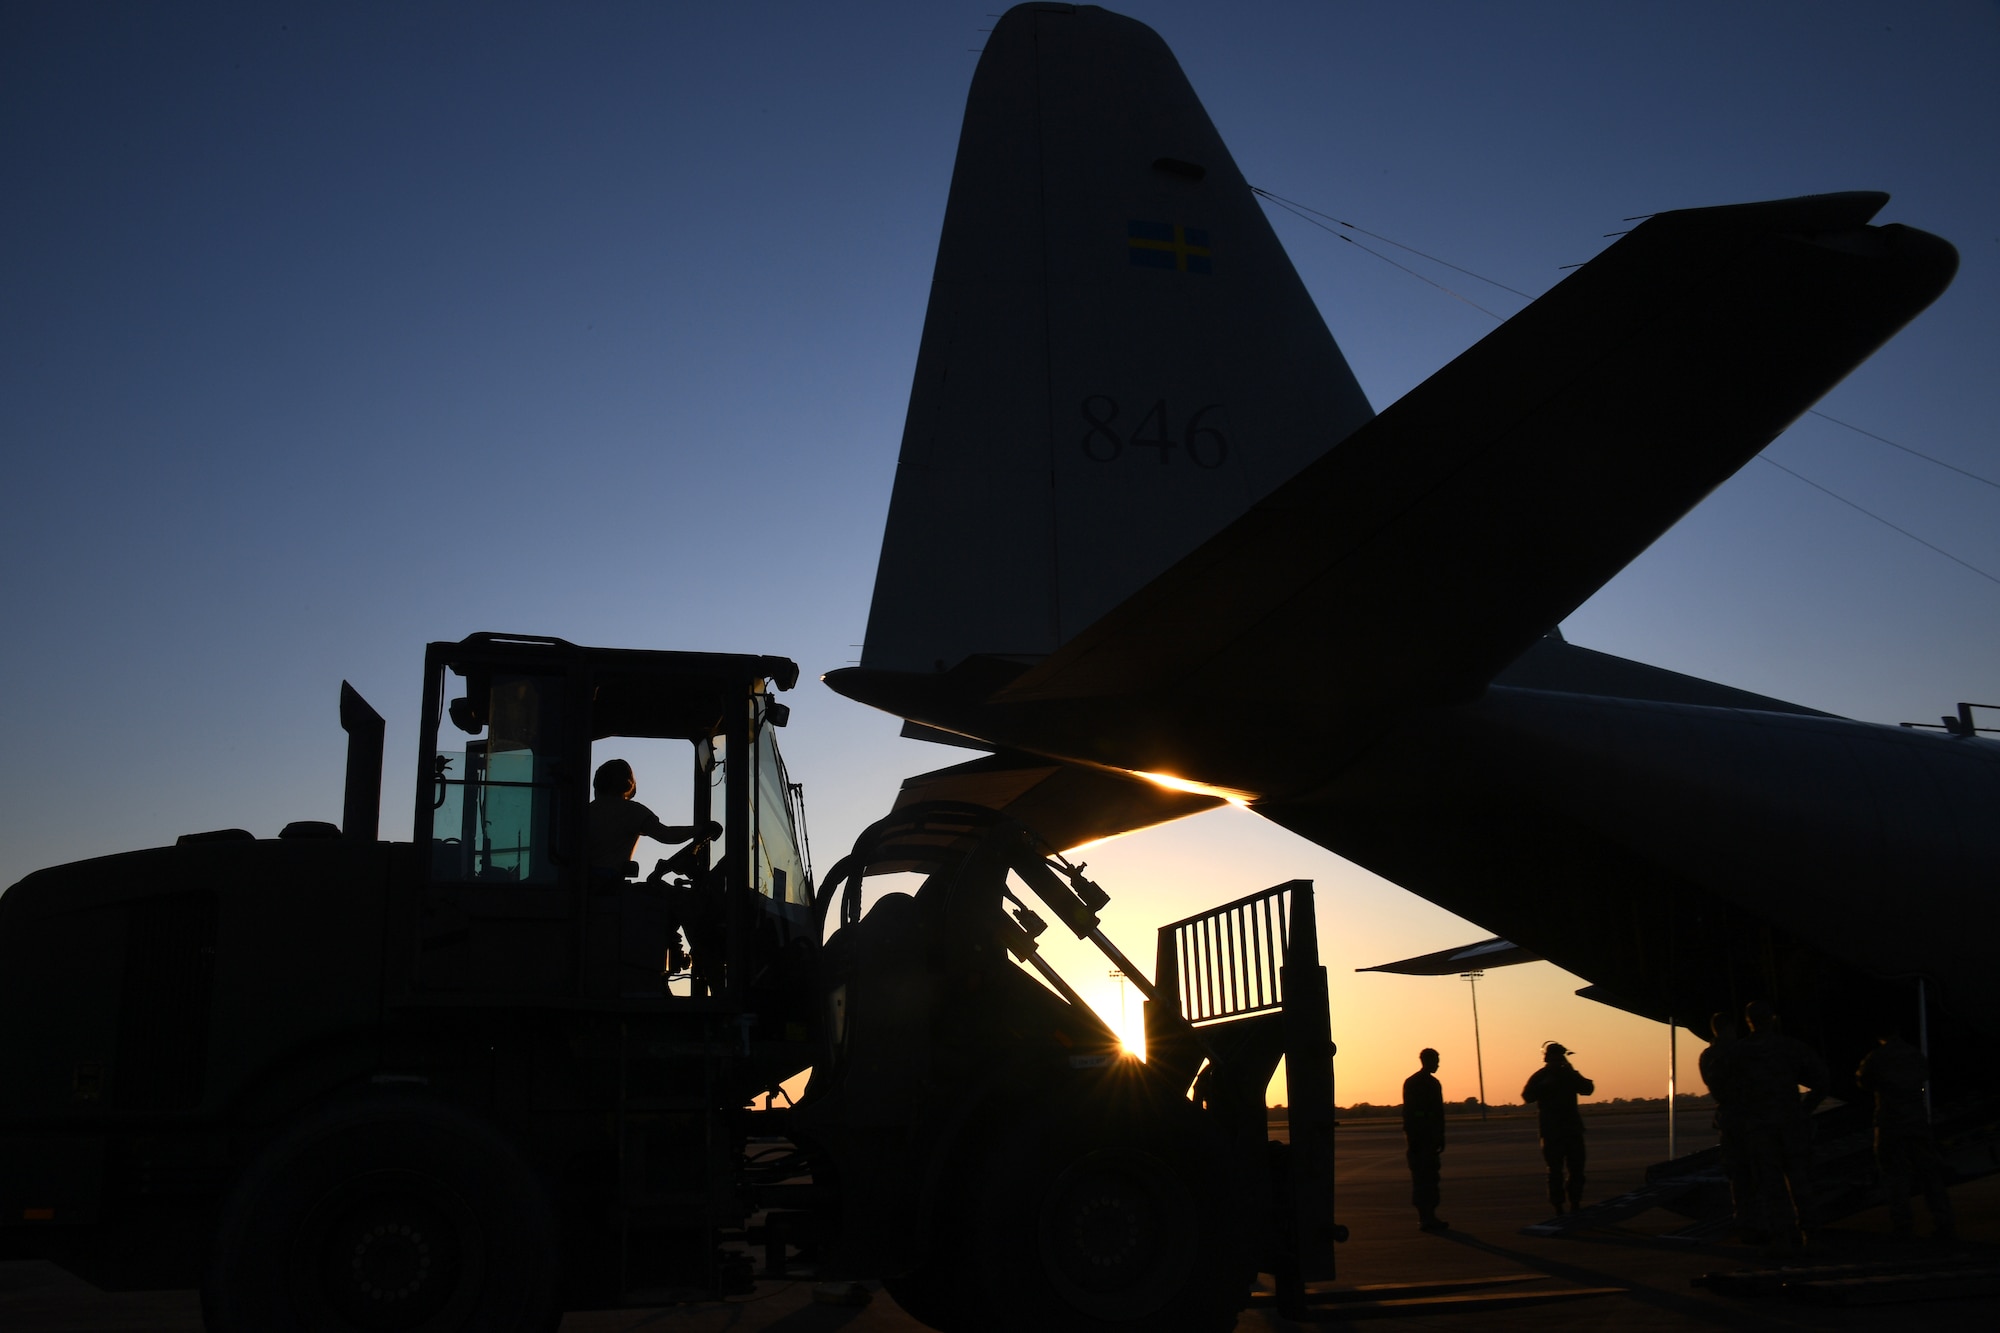 U.S. Air Force aerial porters from the 621st Contingency Response Group offload cargo from a C-130 aircraft during exercise Green Flag Little Rock, Oct. 23, 2019, Alexandria International Airport, Louisiana. During the exercise the team loaded and downloaded tactical vehicles, airdrop bundles, along with a variety of other pallets to support the Army. (U.S. Air Force photo by Tech. Sgt. Liliana Moreno)